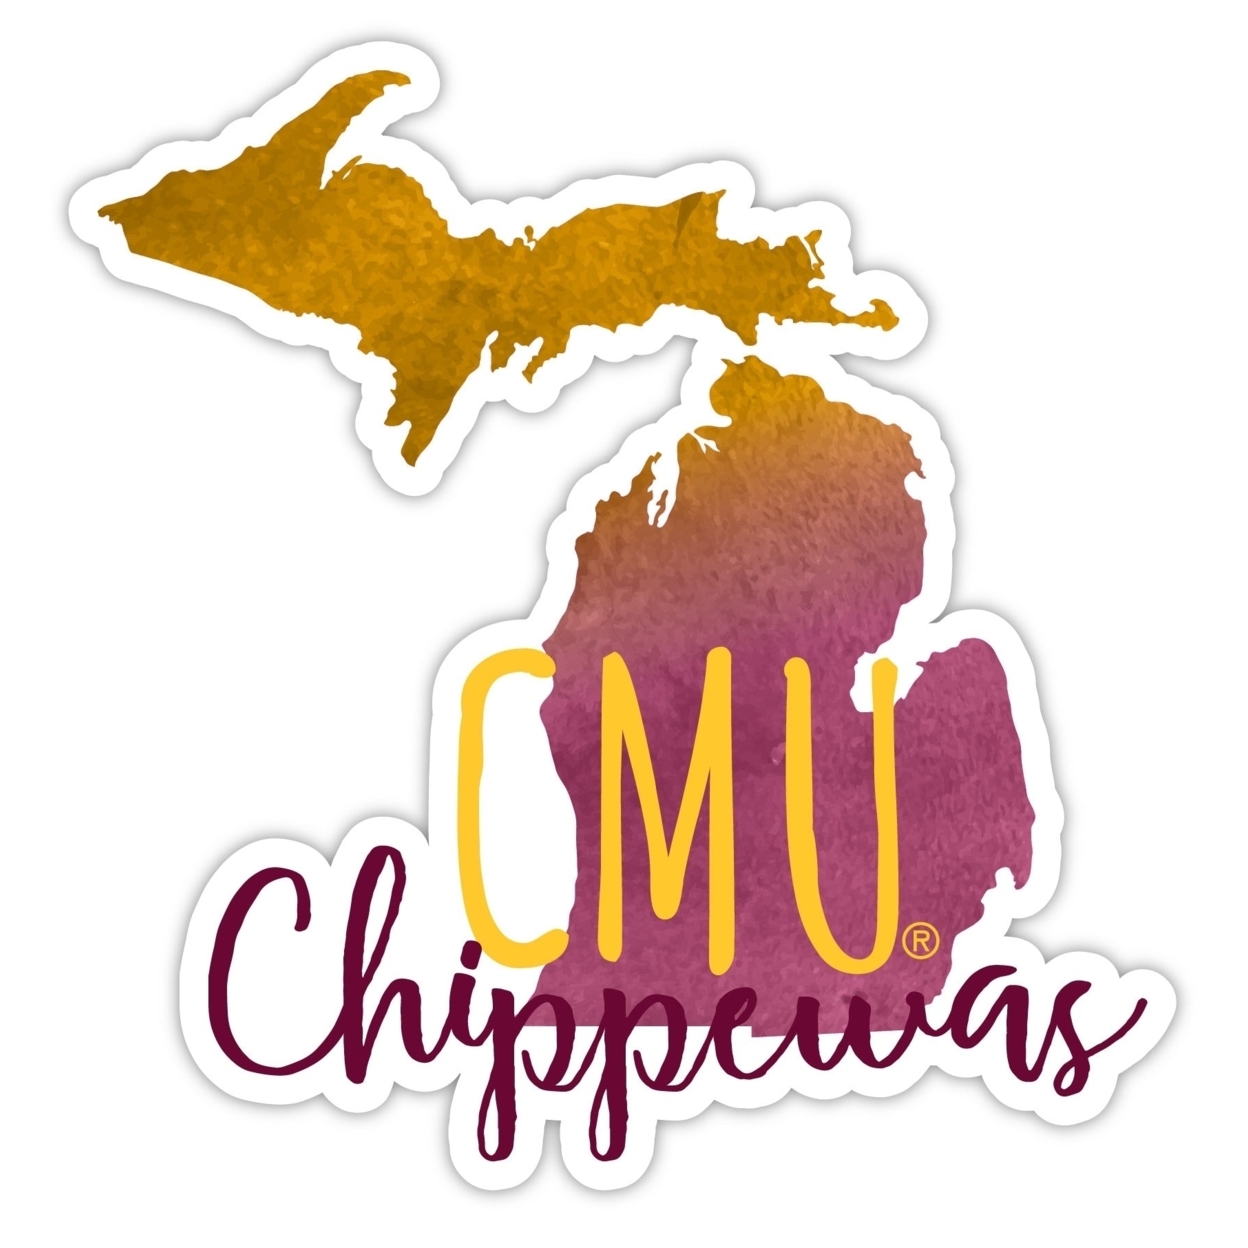 Central Michigan University Watercolor State Die Cut Decal 4-Inch